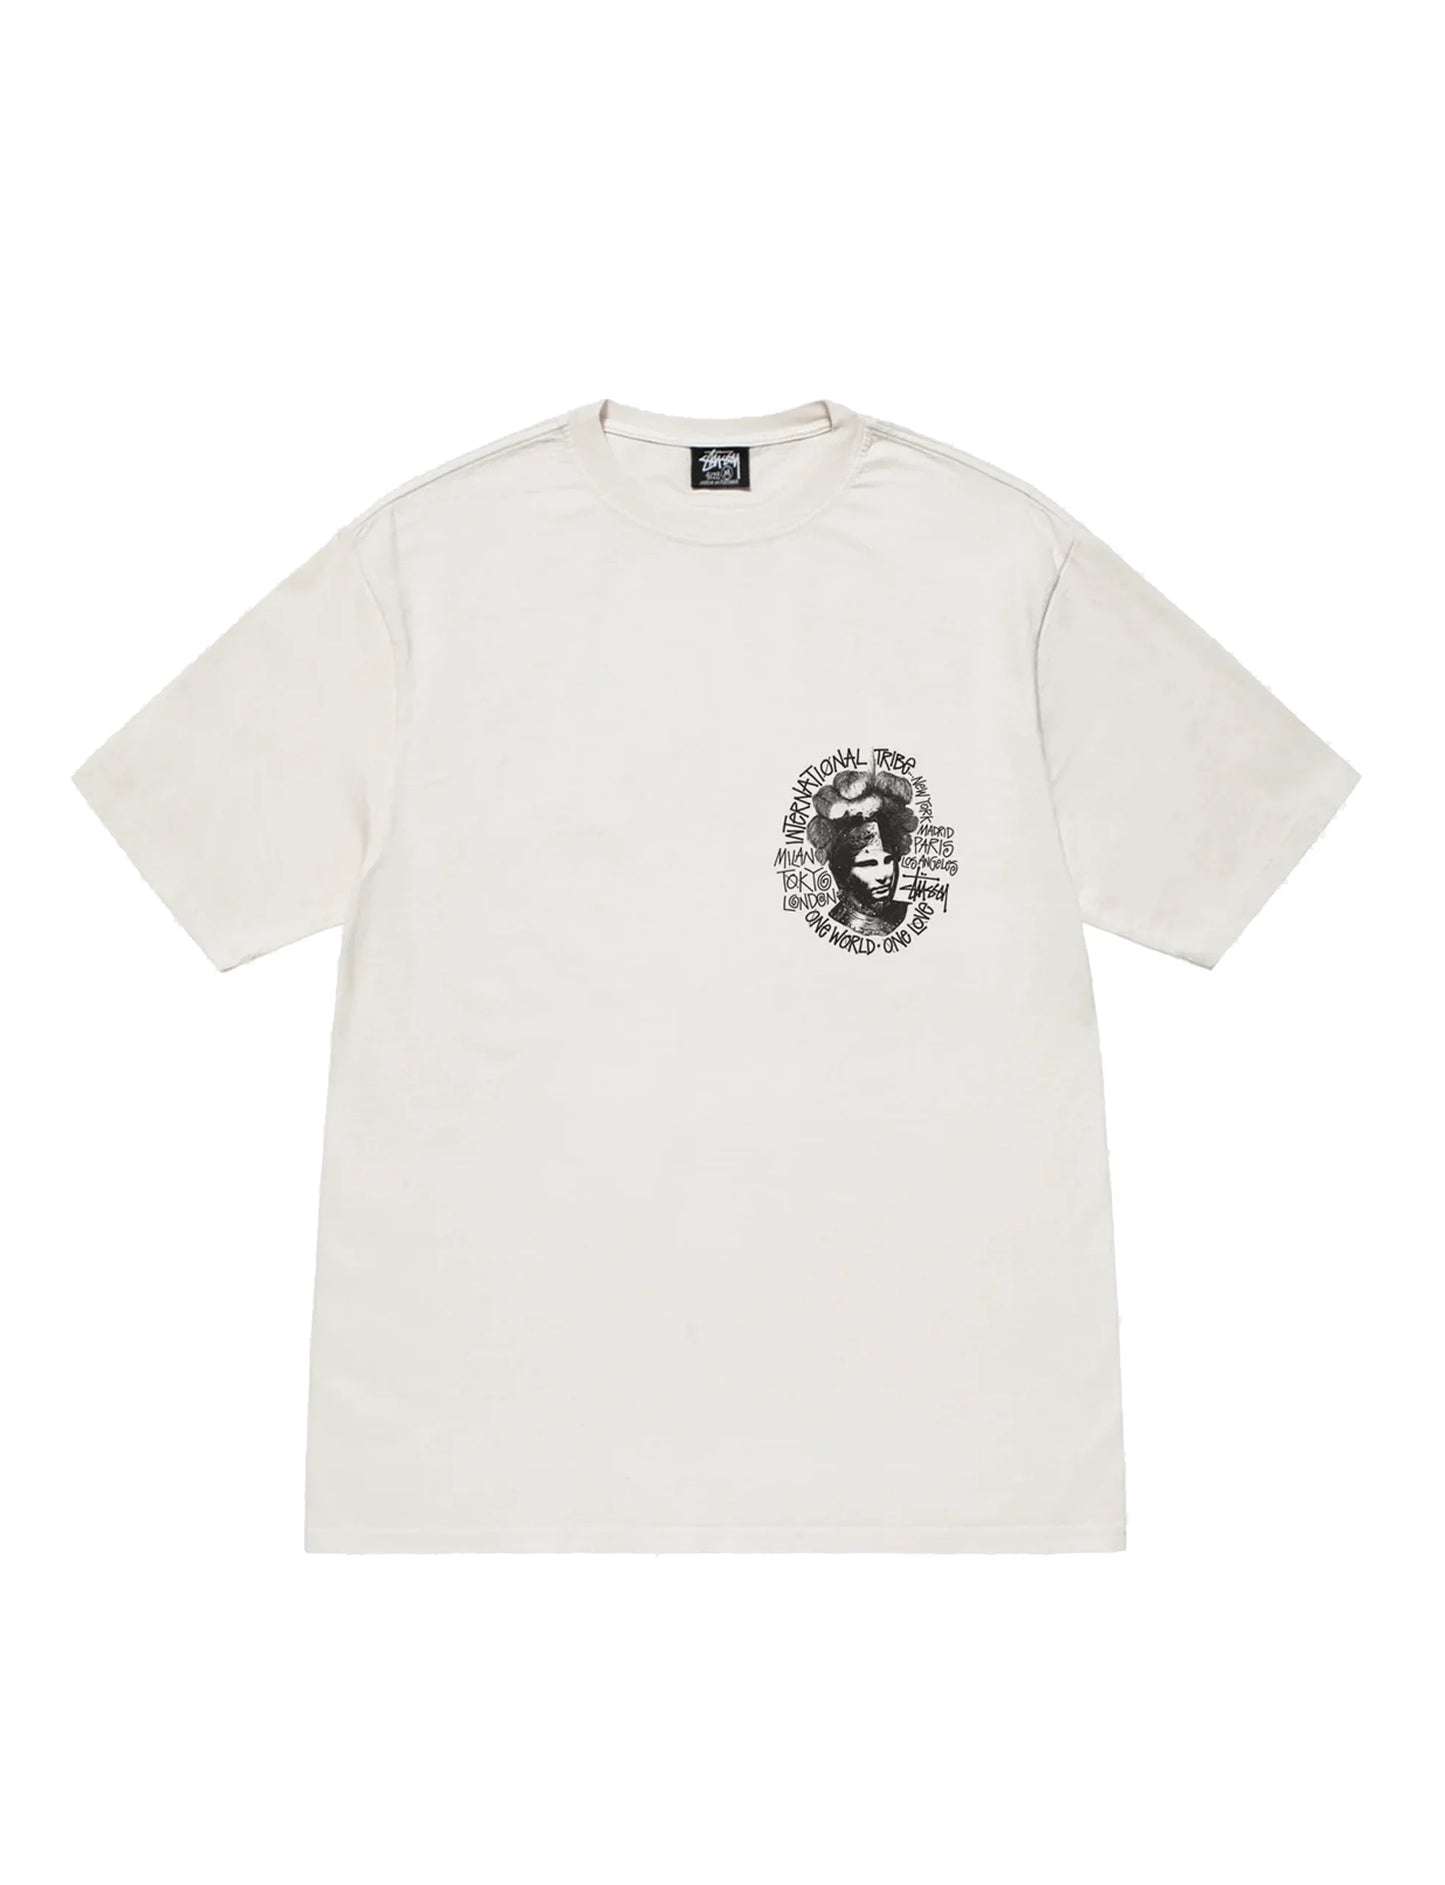 STUSSY CAMELOT PIG. DYED TEE